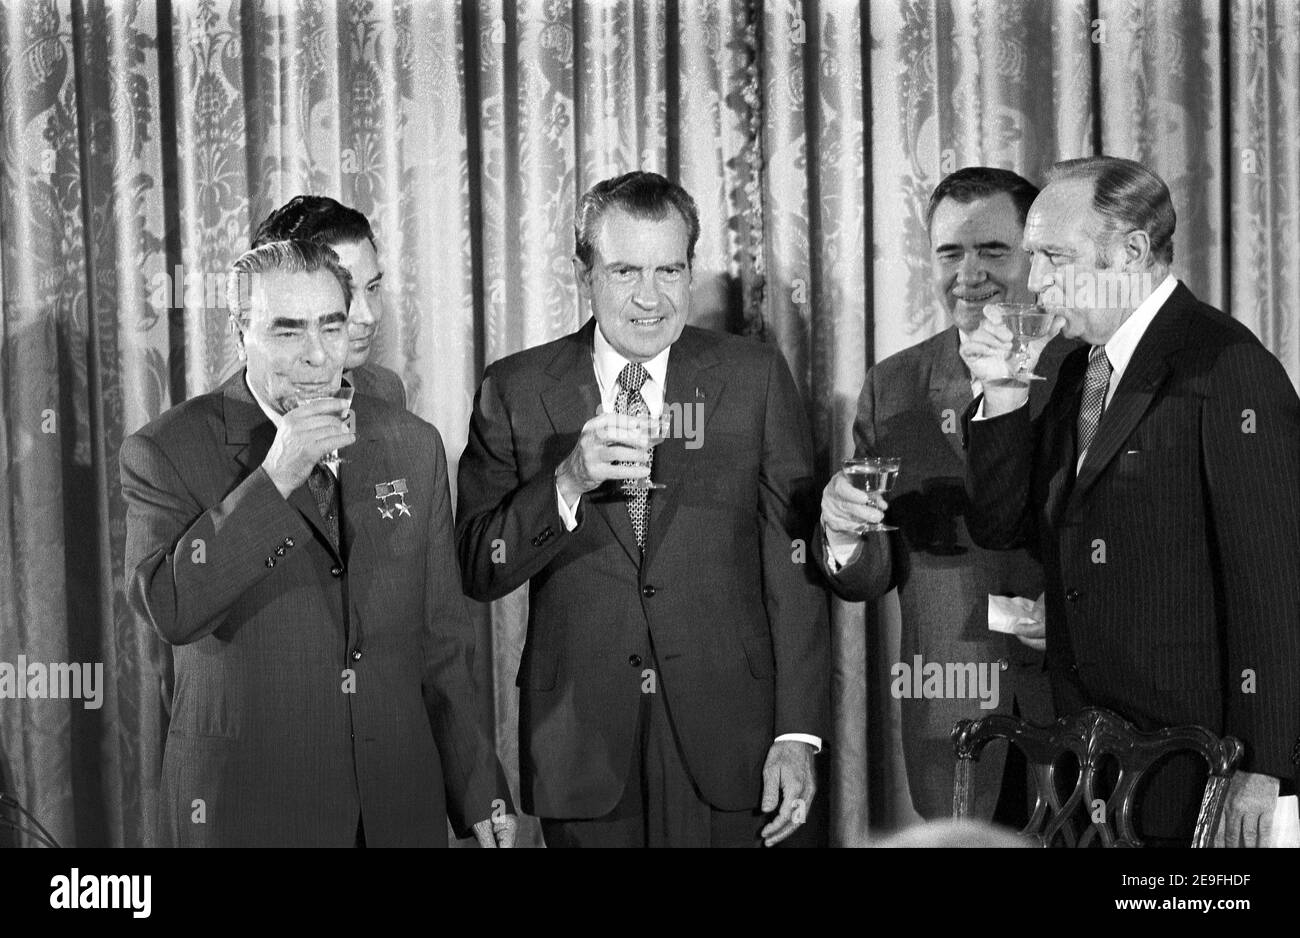 U.S. President Richard Nixon with (left to right) Soviet leader Leonid Brezhnev, Soviet Minister of Foreign Affairs Andrei Gromyko, and Secretary of State William P. Rogers, toasting the signing of Agreements between the two Countries on Oceanography, Transportation and Cultural Exchange, Washington, D.C., USA, Warren K. Leffler, June 19, 1973 Stock Photo